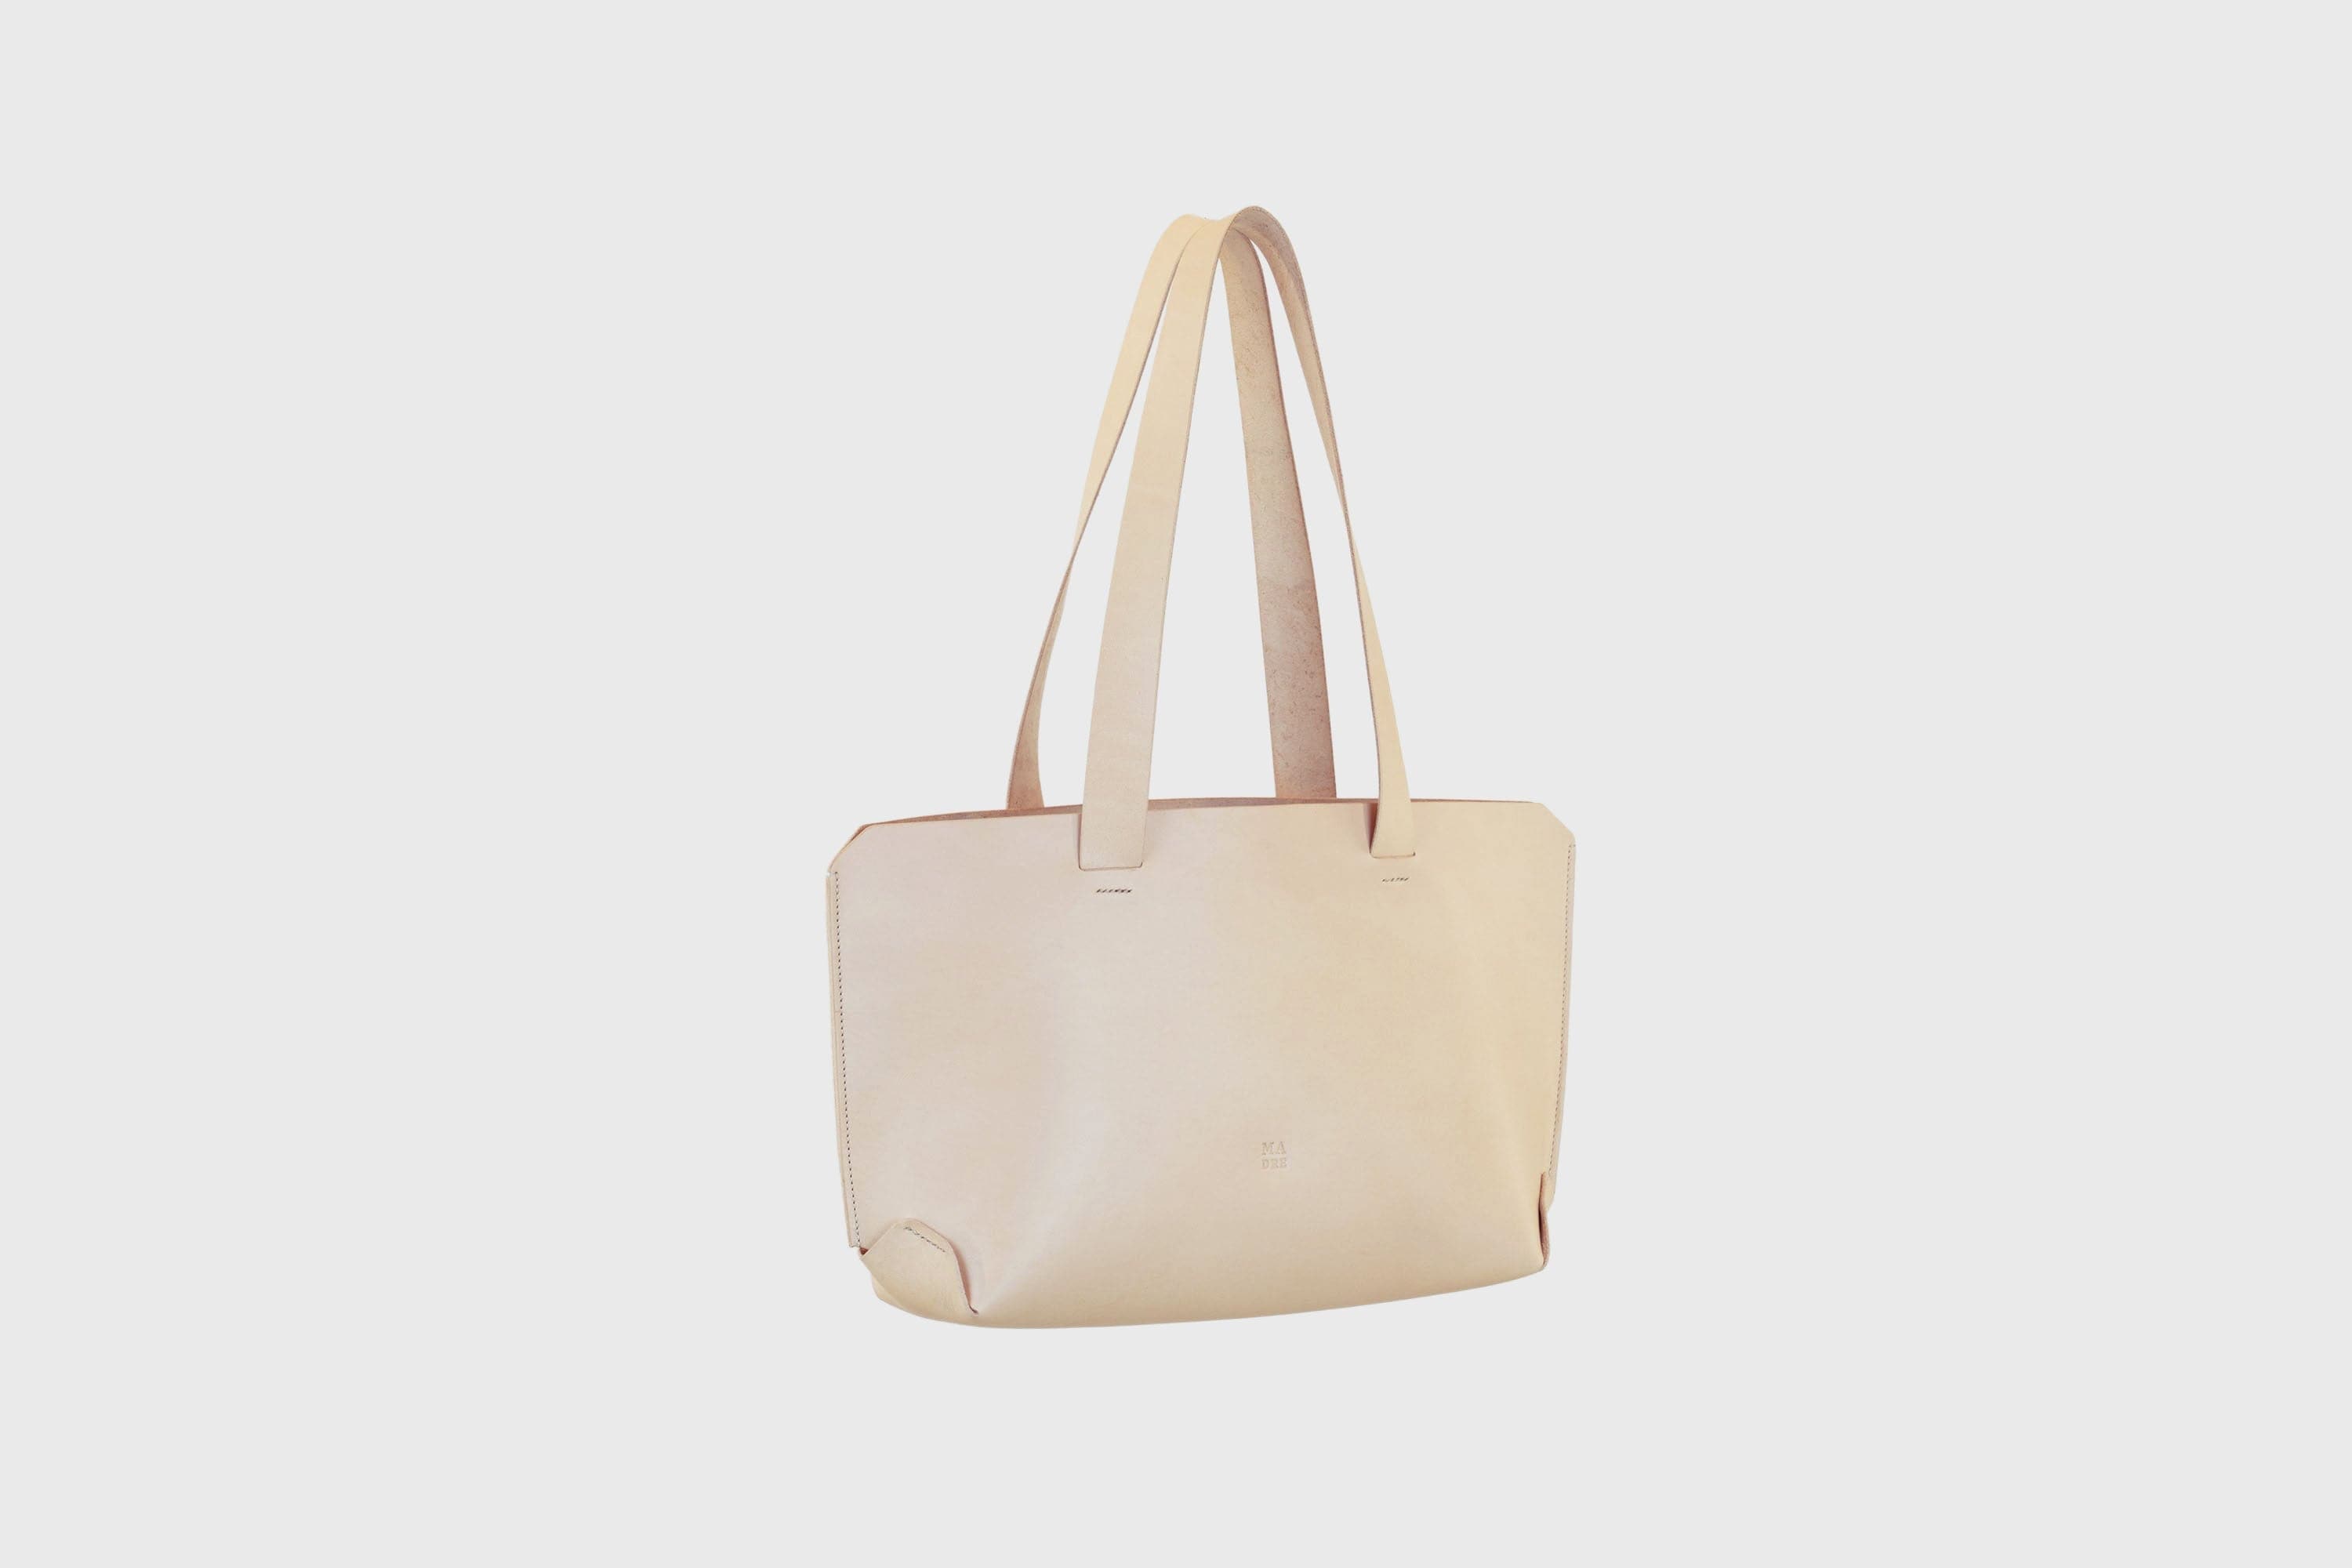 Vachetta Natural Tote Bag Leather Vegetable Tanned Leather Nude Minimalistic Design By Manuel Dreesmann Atelier Madre Barcelona Spain